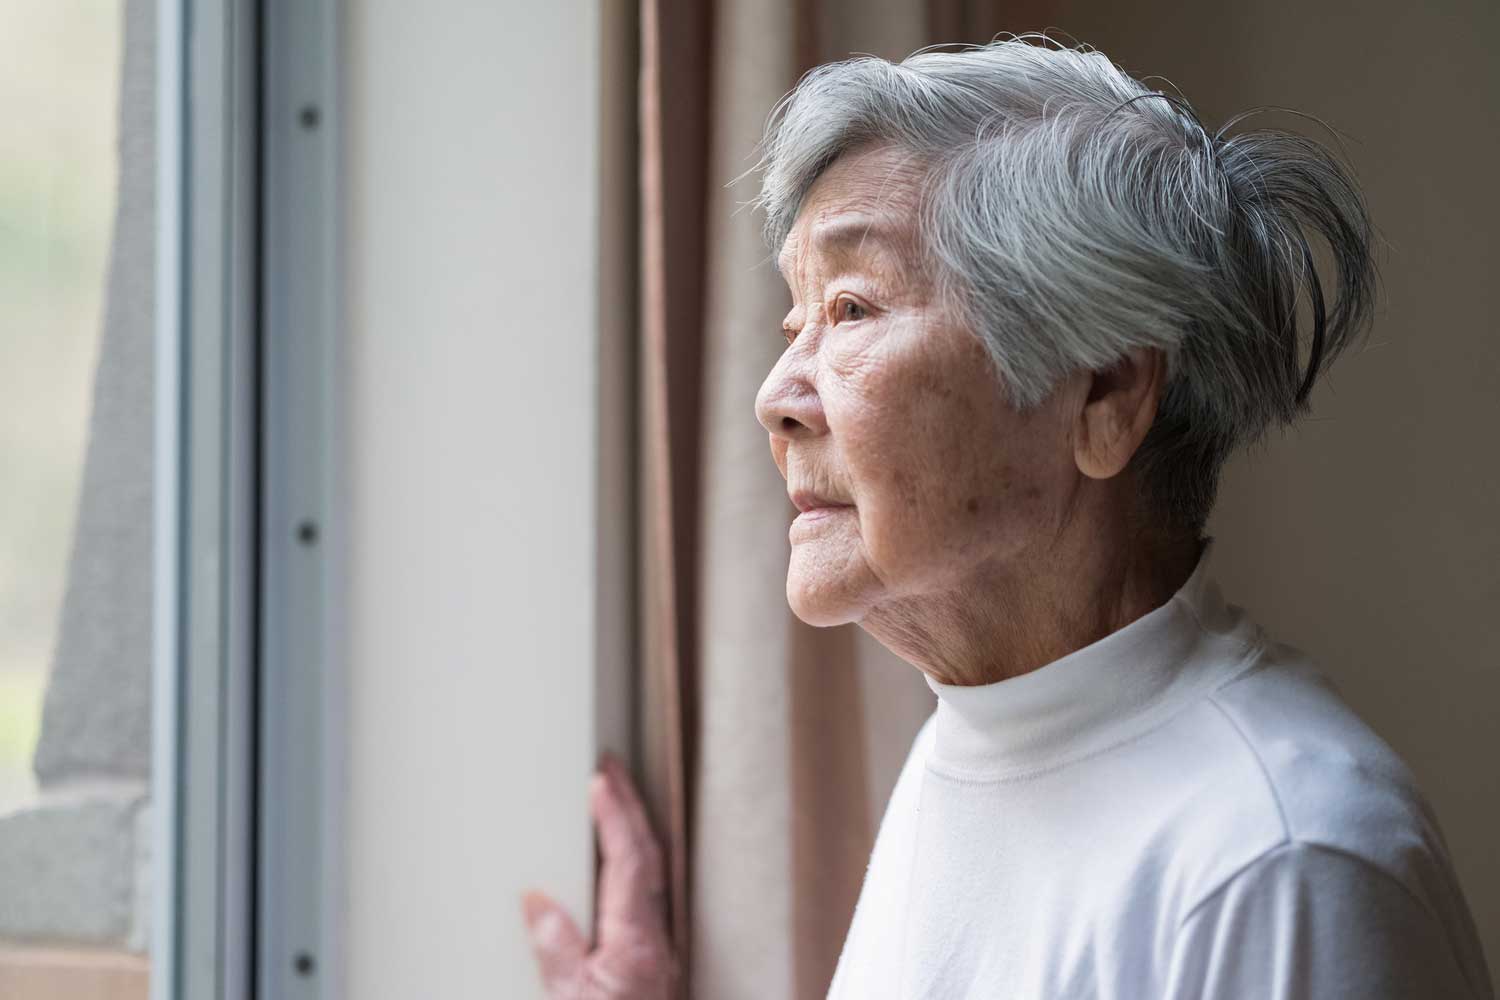 An elderly Asian woman stares wistfully out of a window.